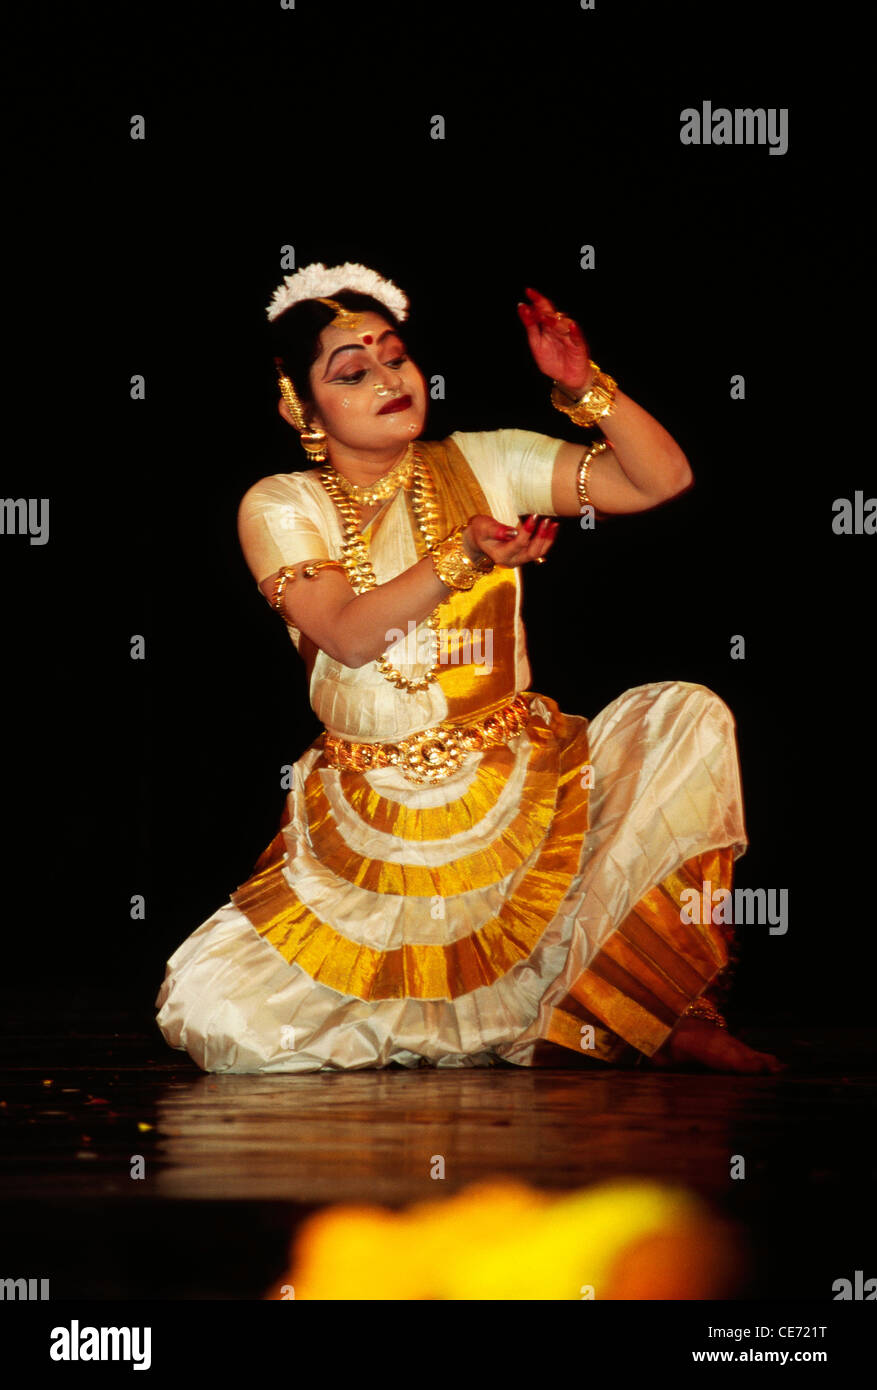 DBA 84227 : Mohiniattam ; woman performing classical dance of India   Model Released Stock Photo